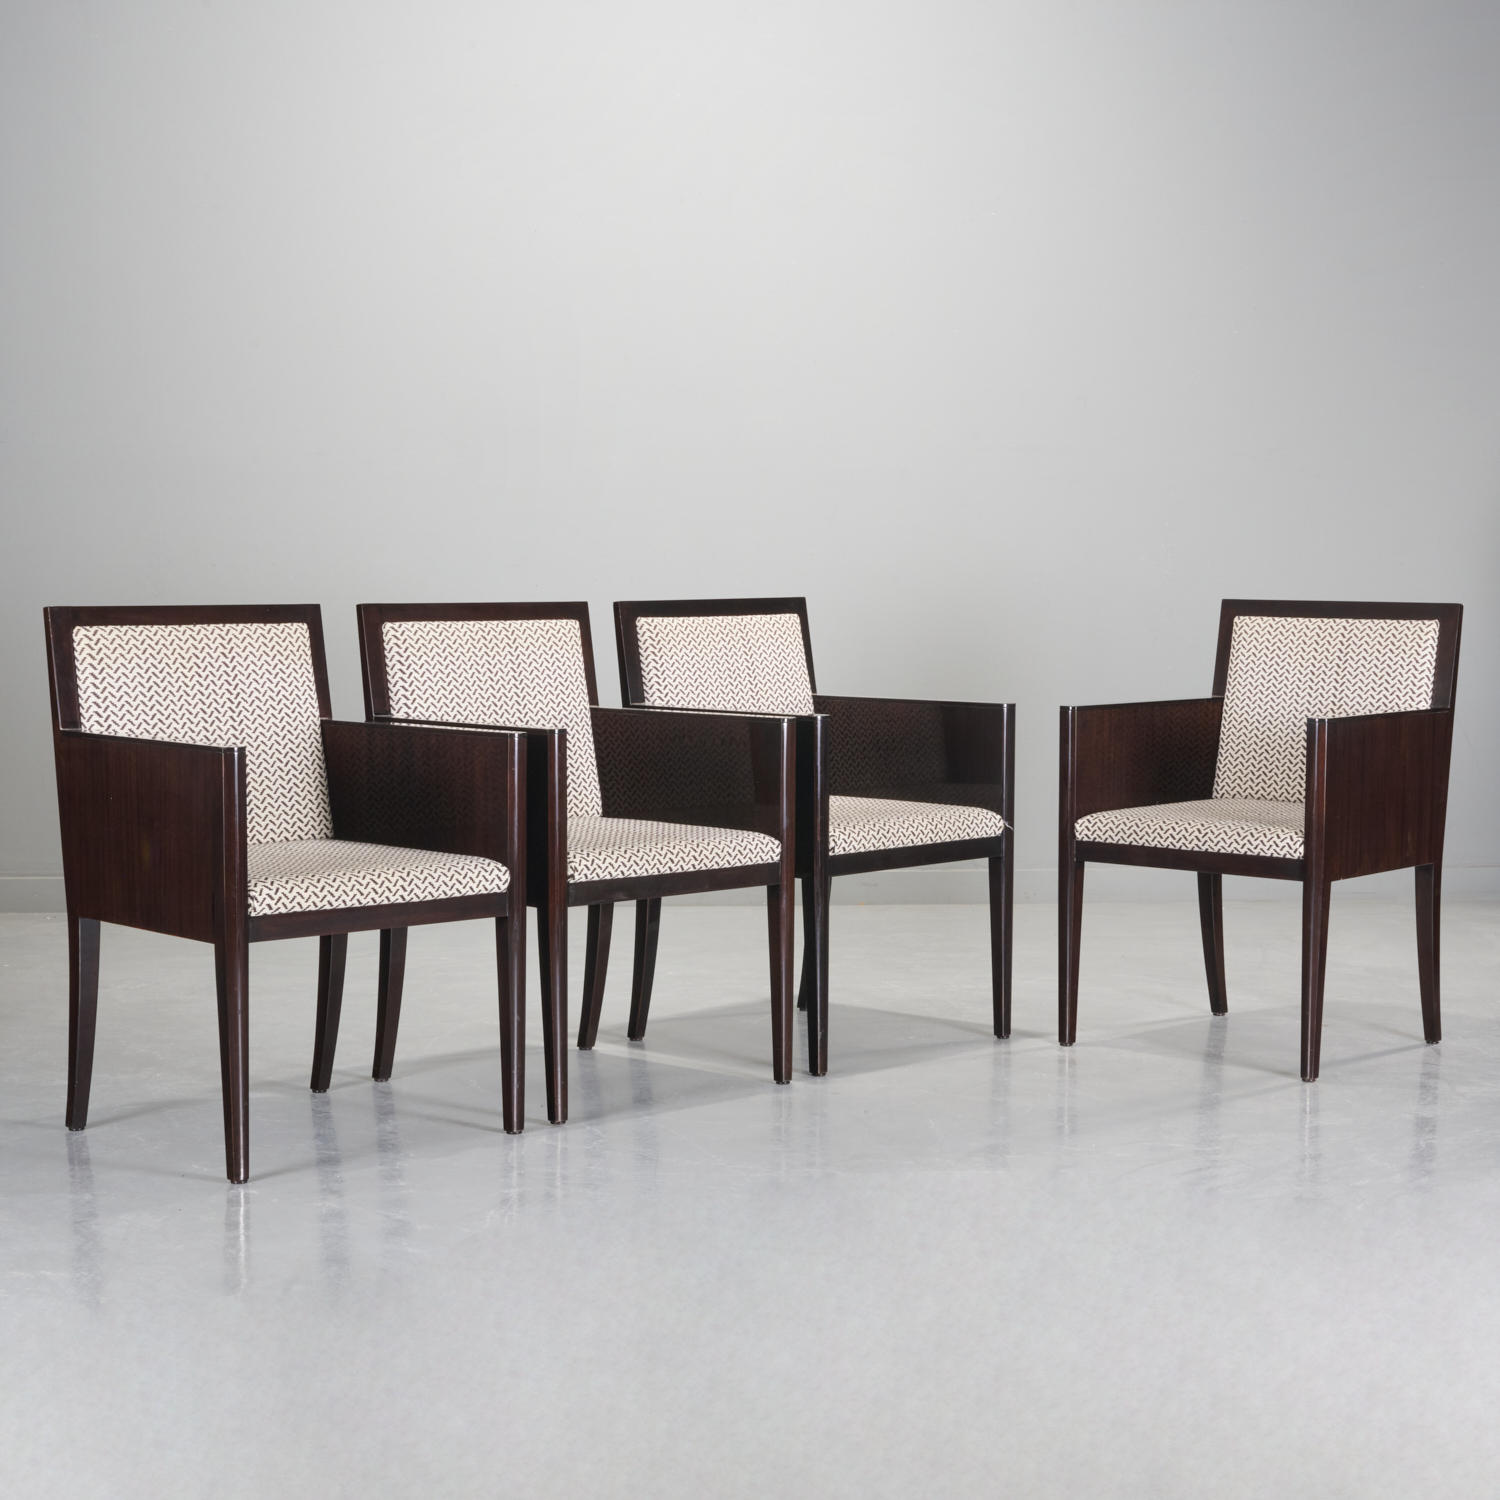 JMF STYLE BROWN LACQUERED ARMCHAIRS  29d247